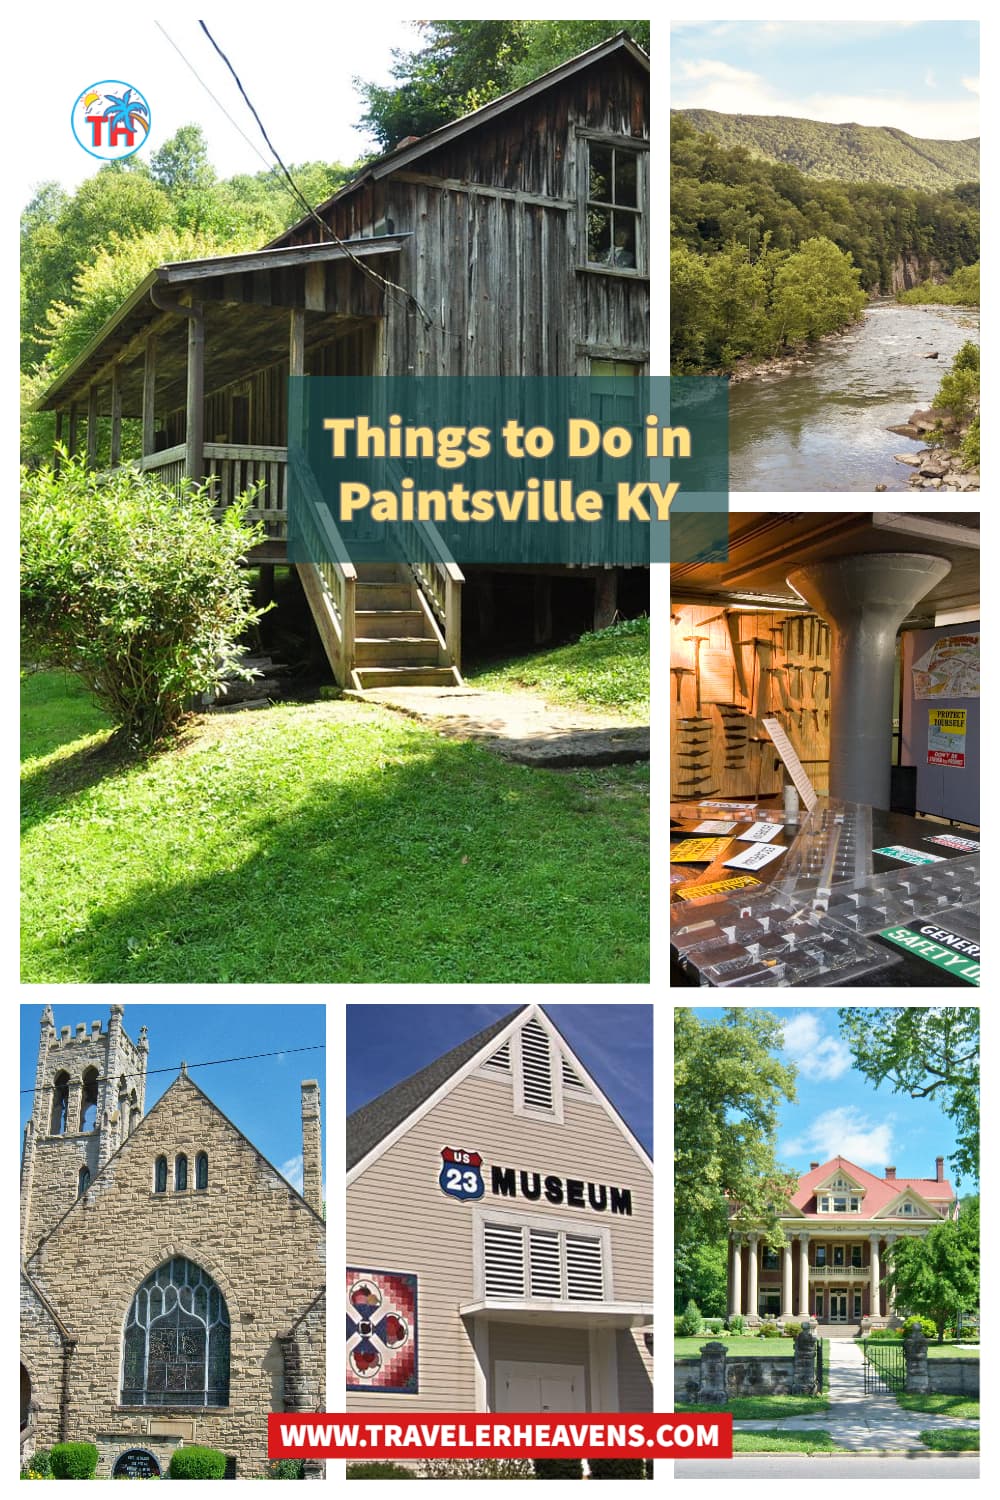 Beautiful Destination, Kentucky, Kentucky Travel Guide, things to do in Paintsville KY, Travel to Paintsville, US Destination, Visit Paintsville, Tourism